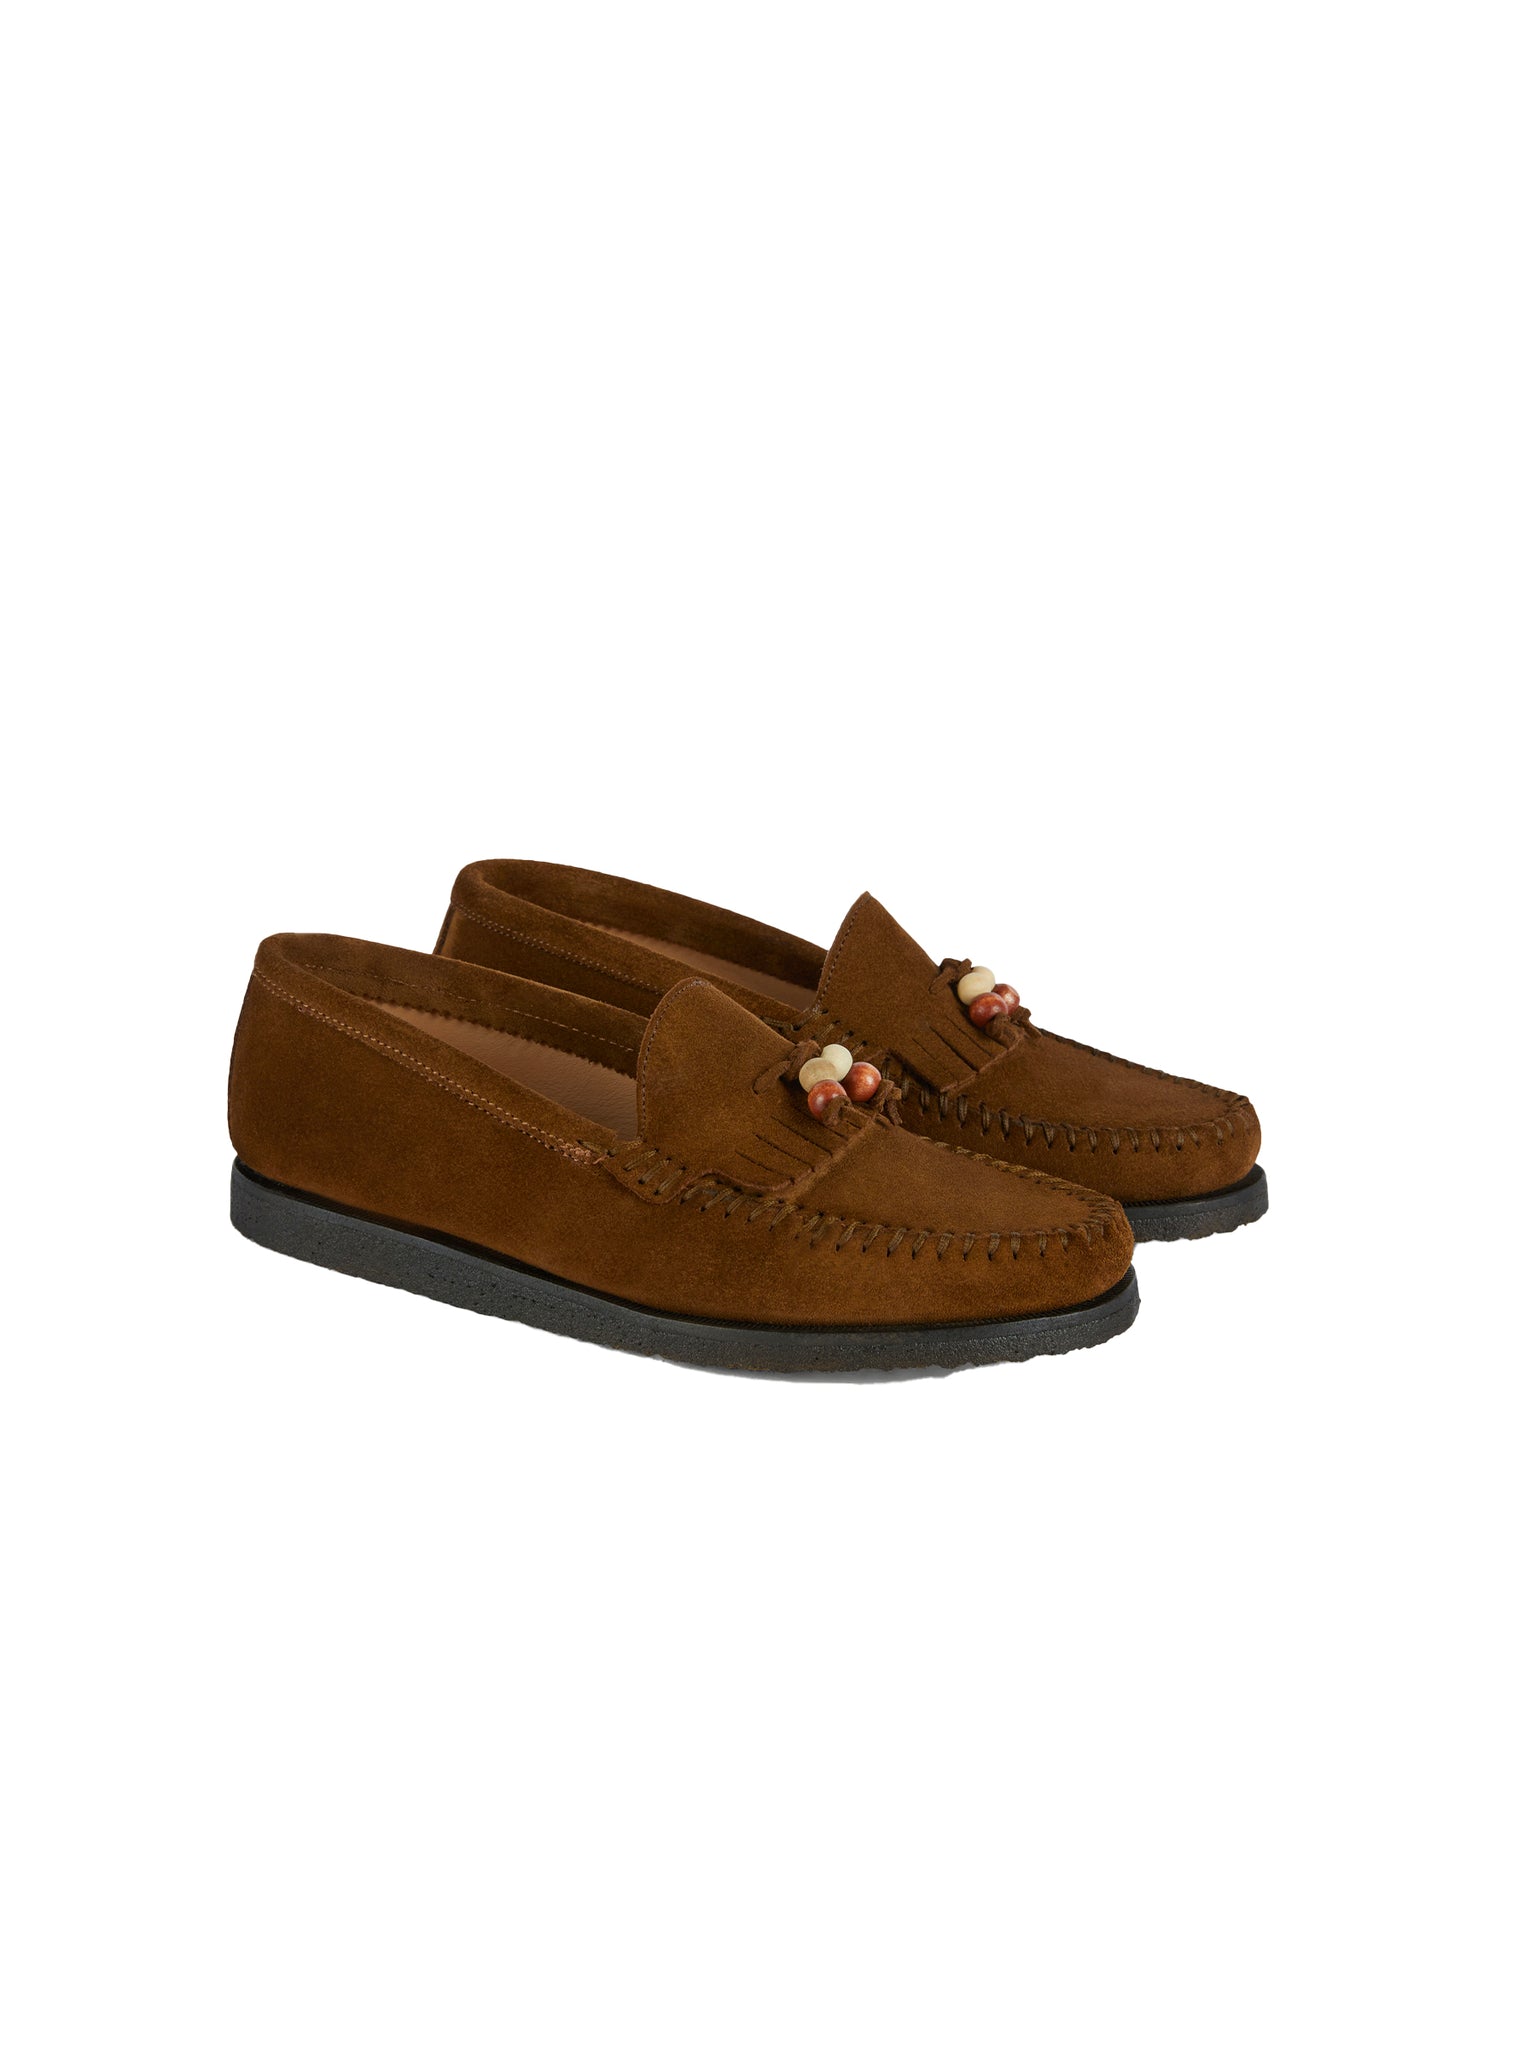 Penny loafers	Balabiott	Brown suede calf leather